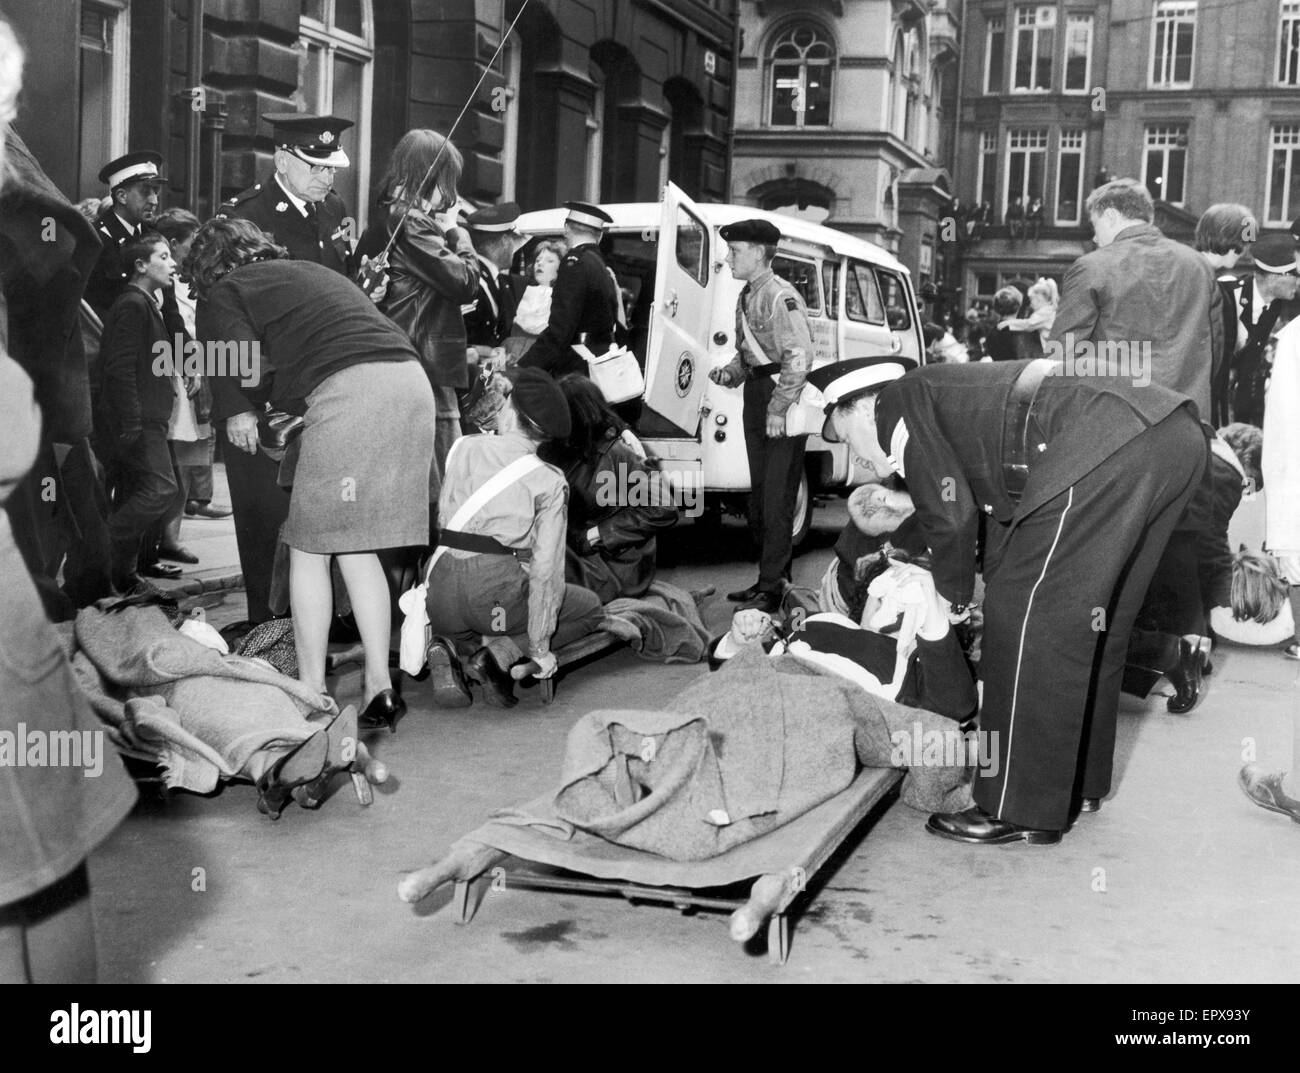 The Beatles in Liverpool, Friday 10th July 1964.  Back home for evening premiere of 'A Hard Day's Night' at the Odeon Cinema. Pictured, girls feeling faint, are cared for outside Town Hall. Stock Photo